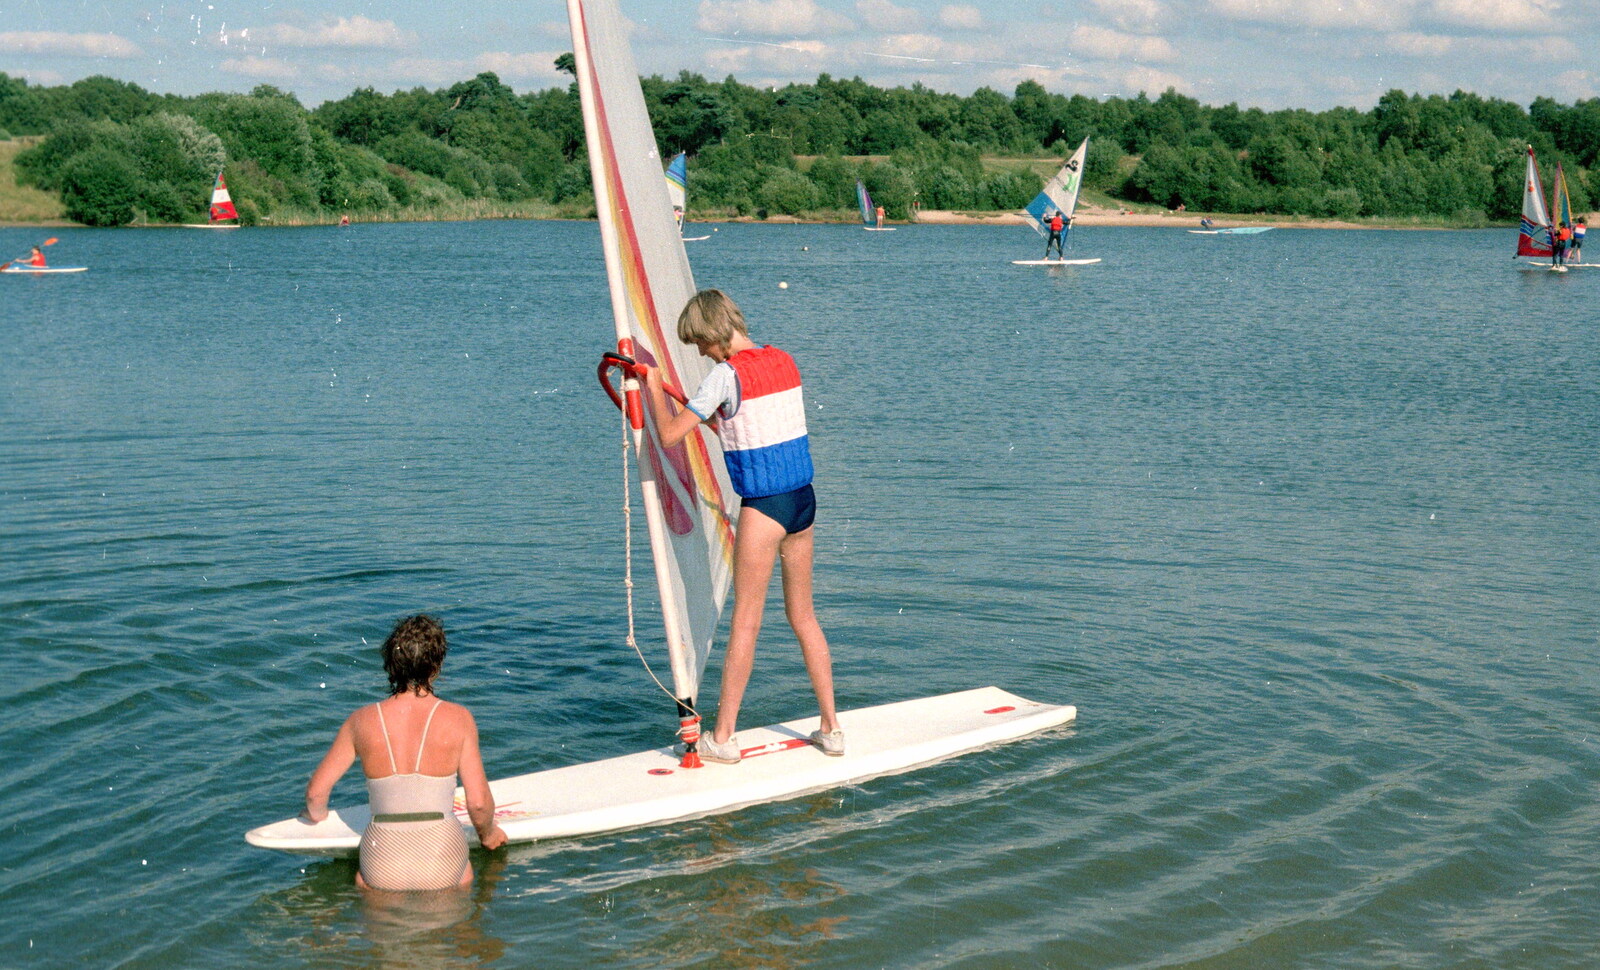 About to set off, hesitantly from Nosher Goes Windsurfing, Macclesfield, Cheshire - 20th June 1985